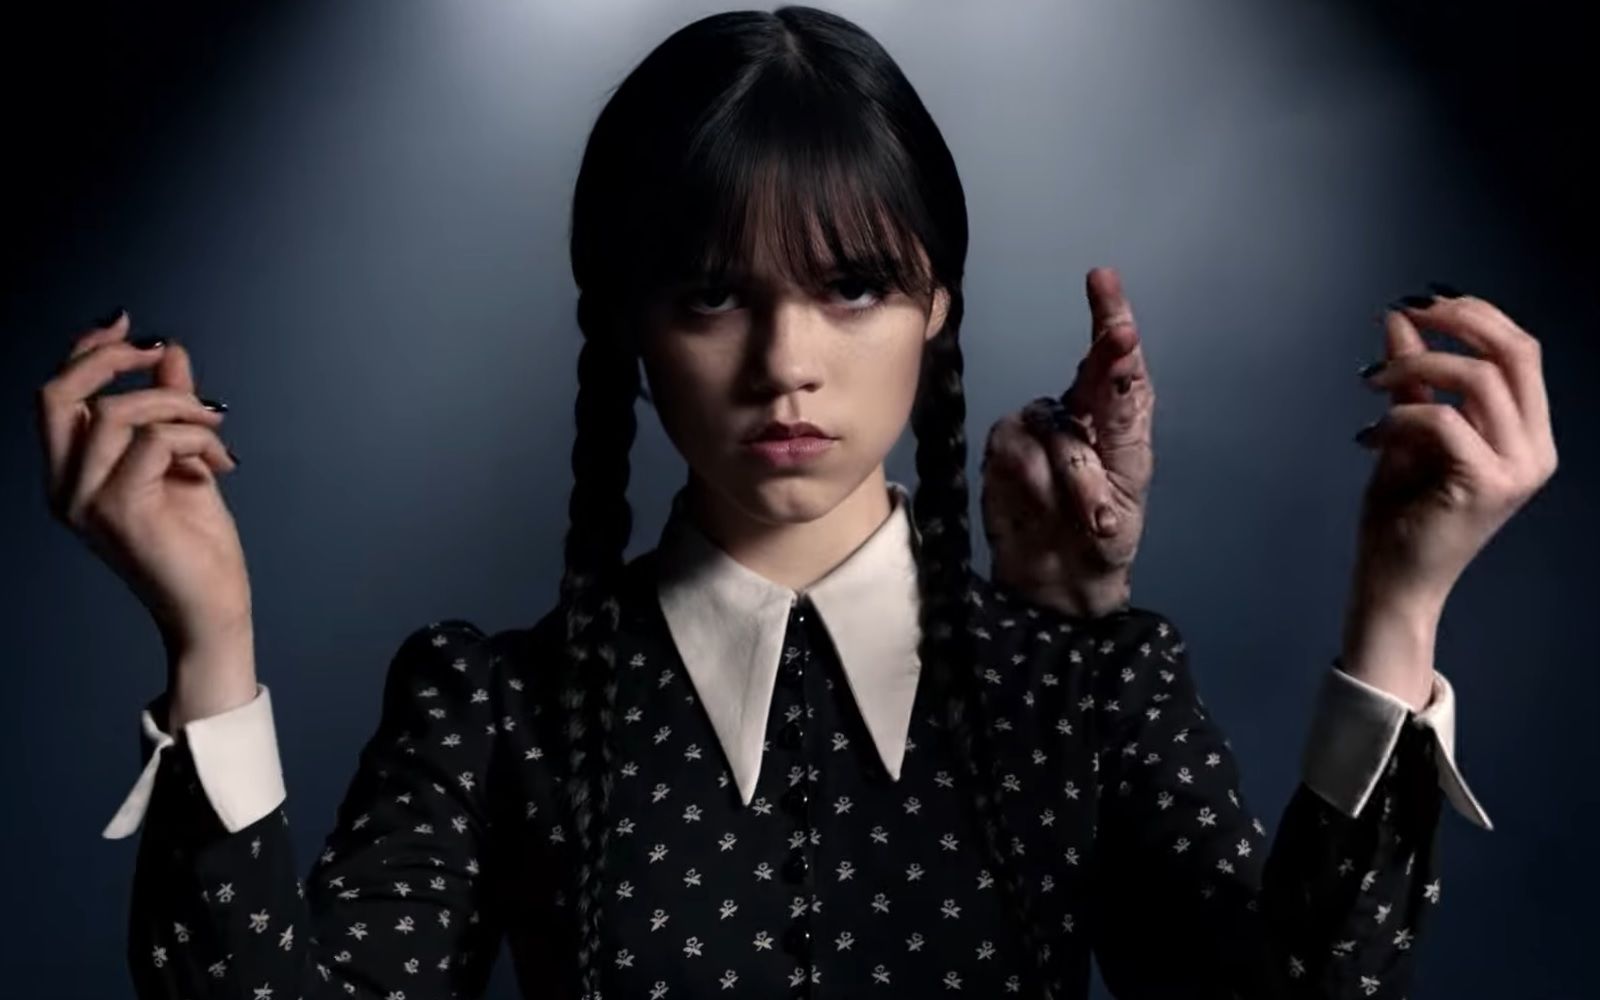 Who's the new Wednesday Addams?